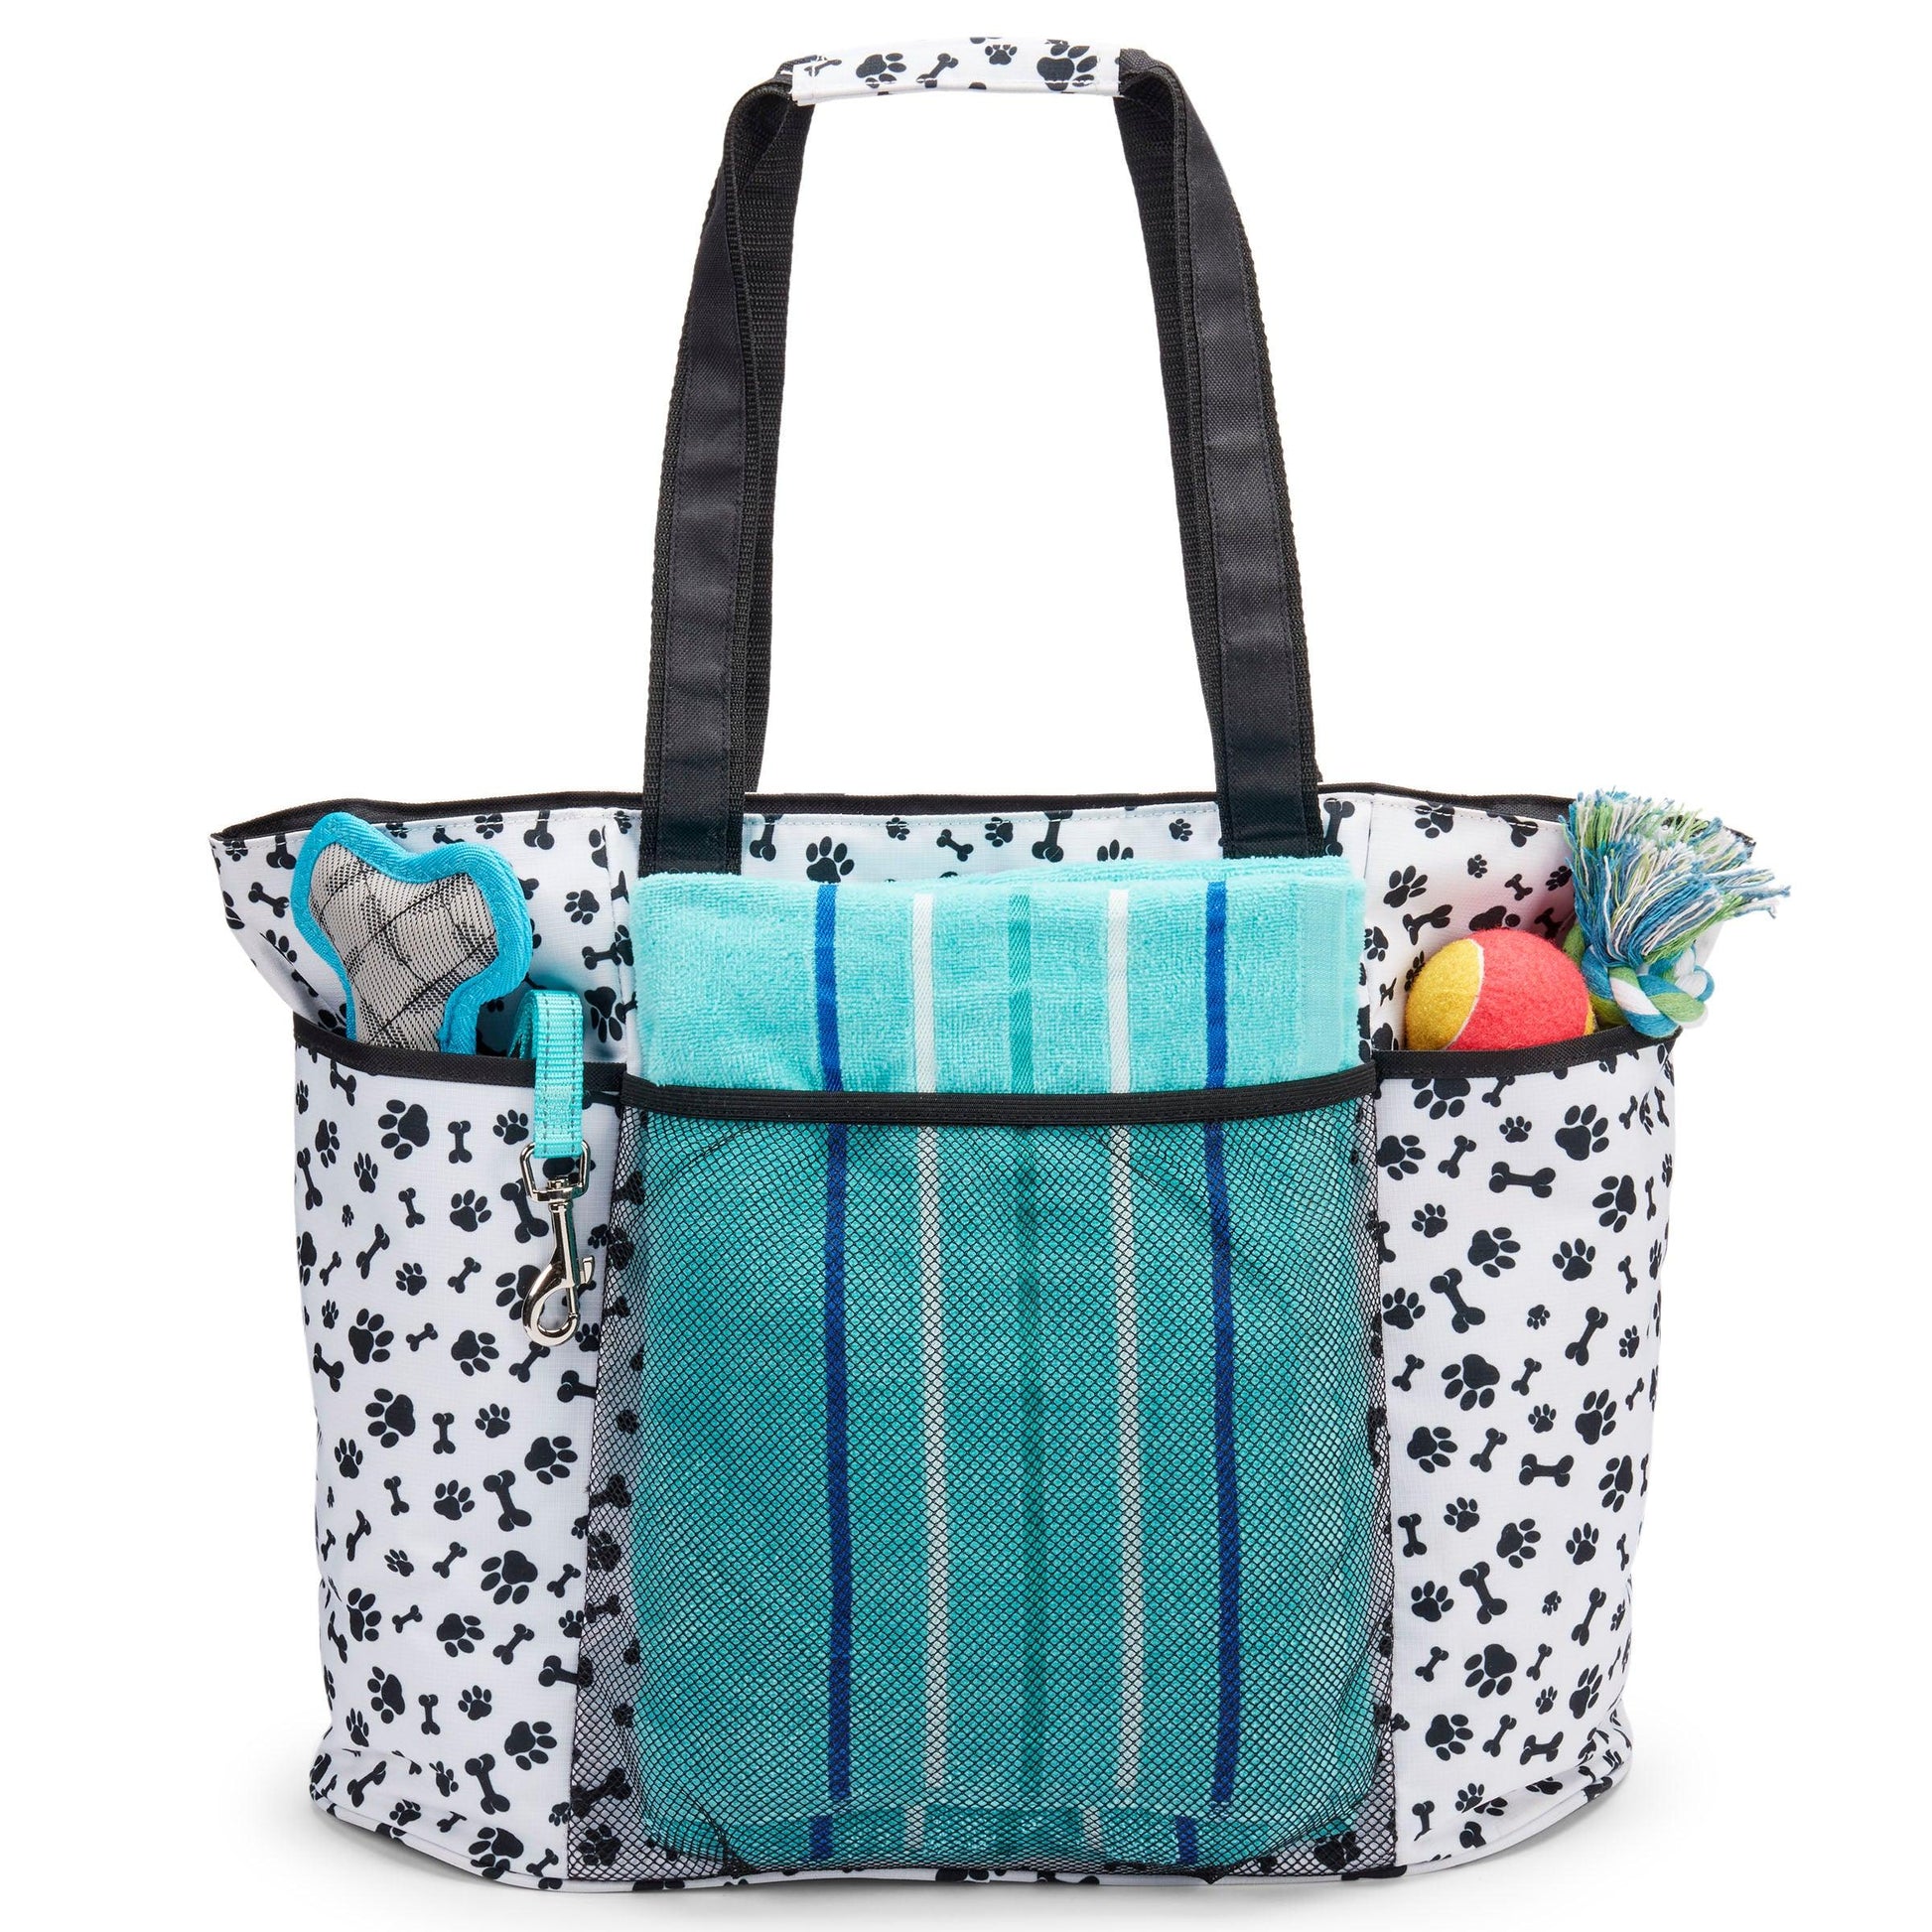 Mobile Dog Gear Dogs Essentials Tote Bag - SteelBlue